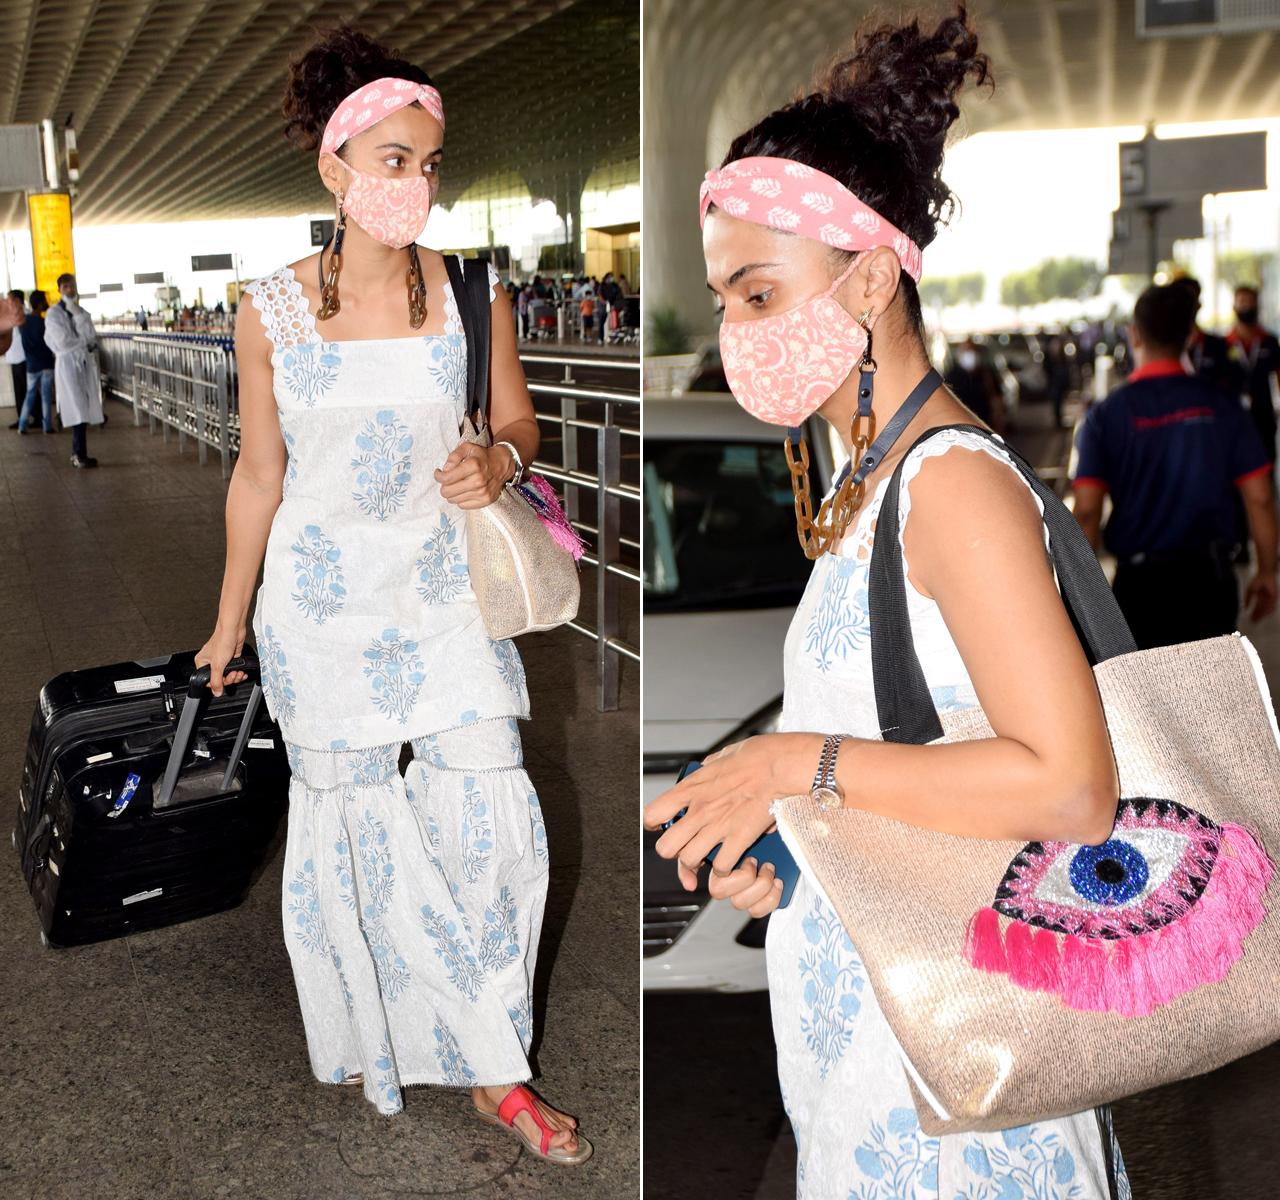 Taapsee Pannu was clicked at Mumbai airport too. The actress opted for a comfy looking cotton sharara suit and a pretty hairband and a matching mask. But what caught our attention was Taapsee's handbag. The bag had embroidered evil eye logo on it, but netizens pointed out that it resembles the logo of Salman Khan's infamous reality show 'Bigg Boss'.